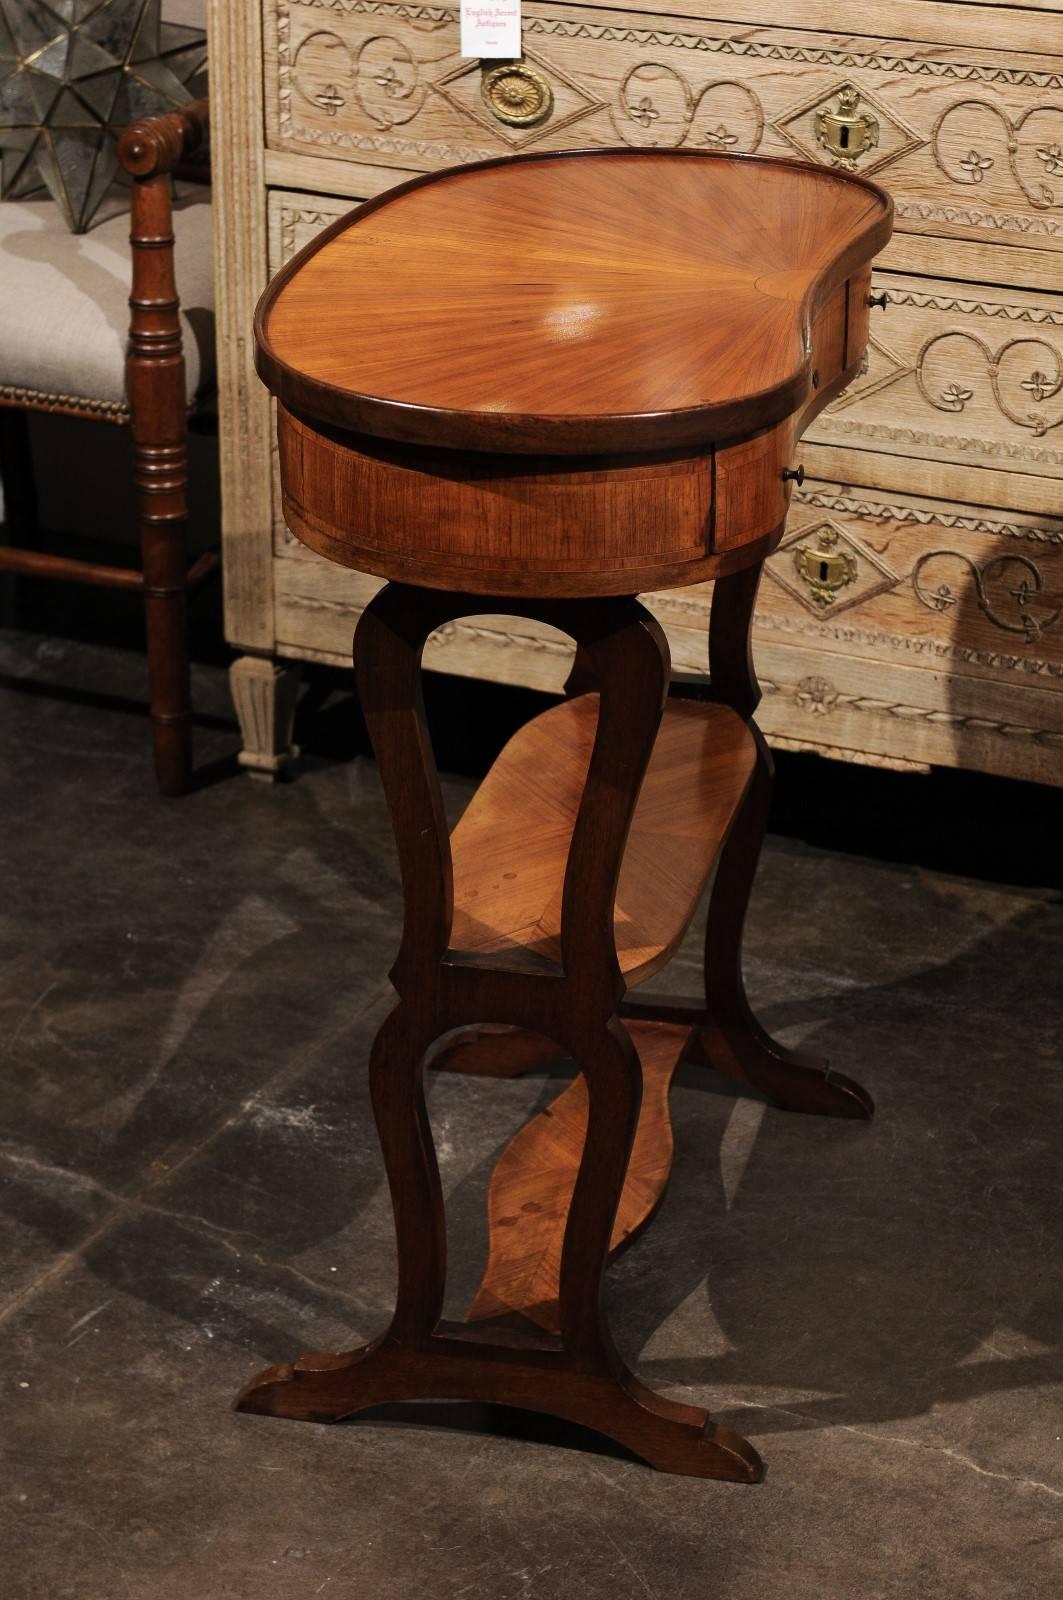 Wood French Inlaid Bean-Shaped Tiered Small Side Table from the 1920s